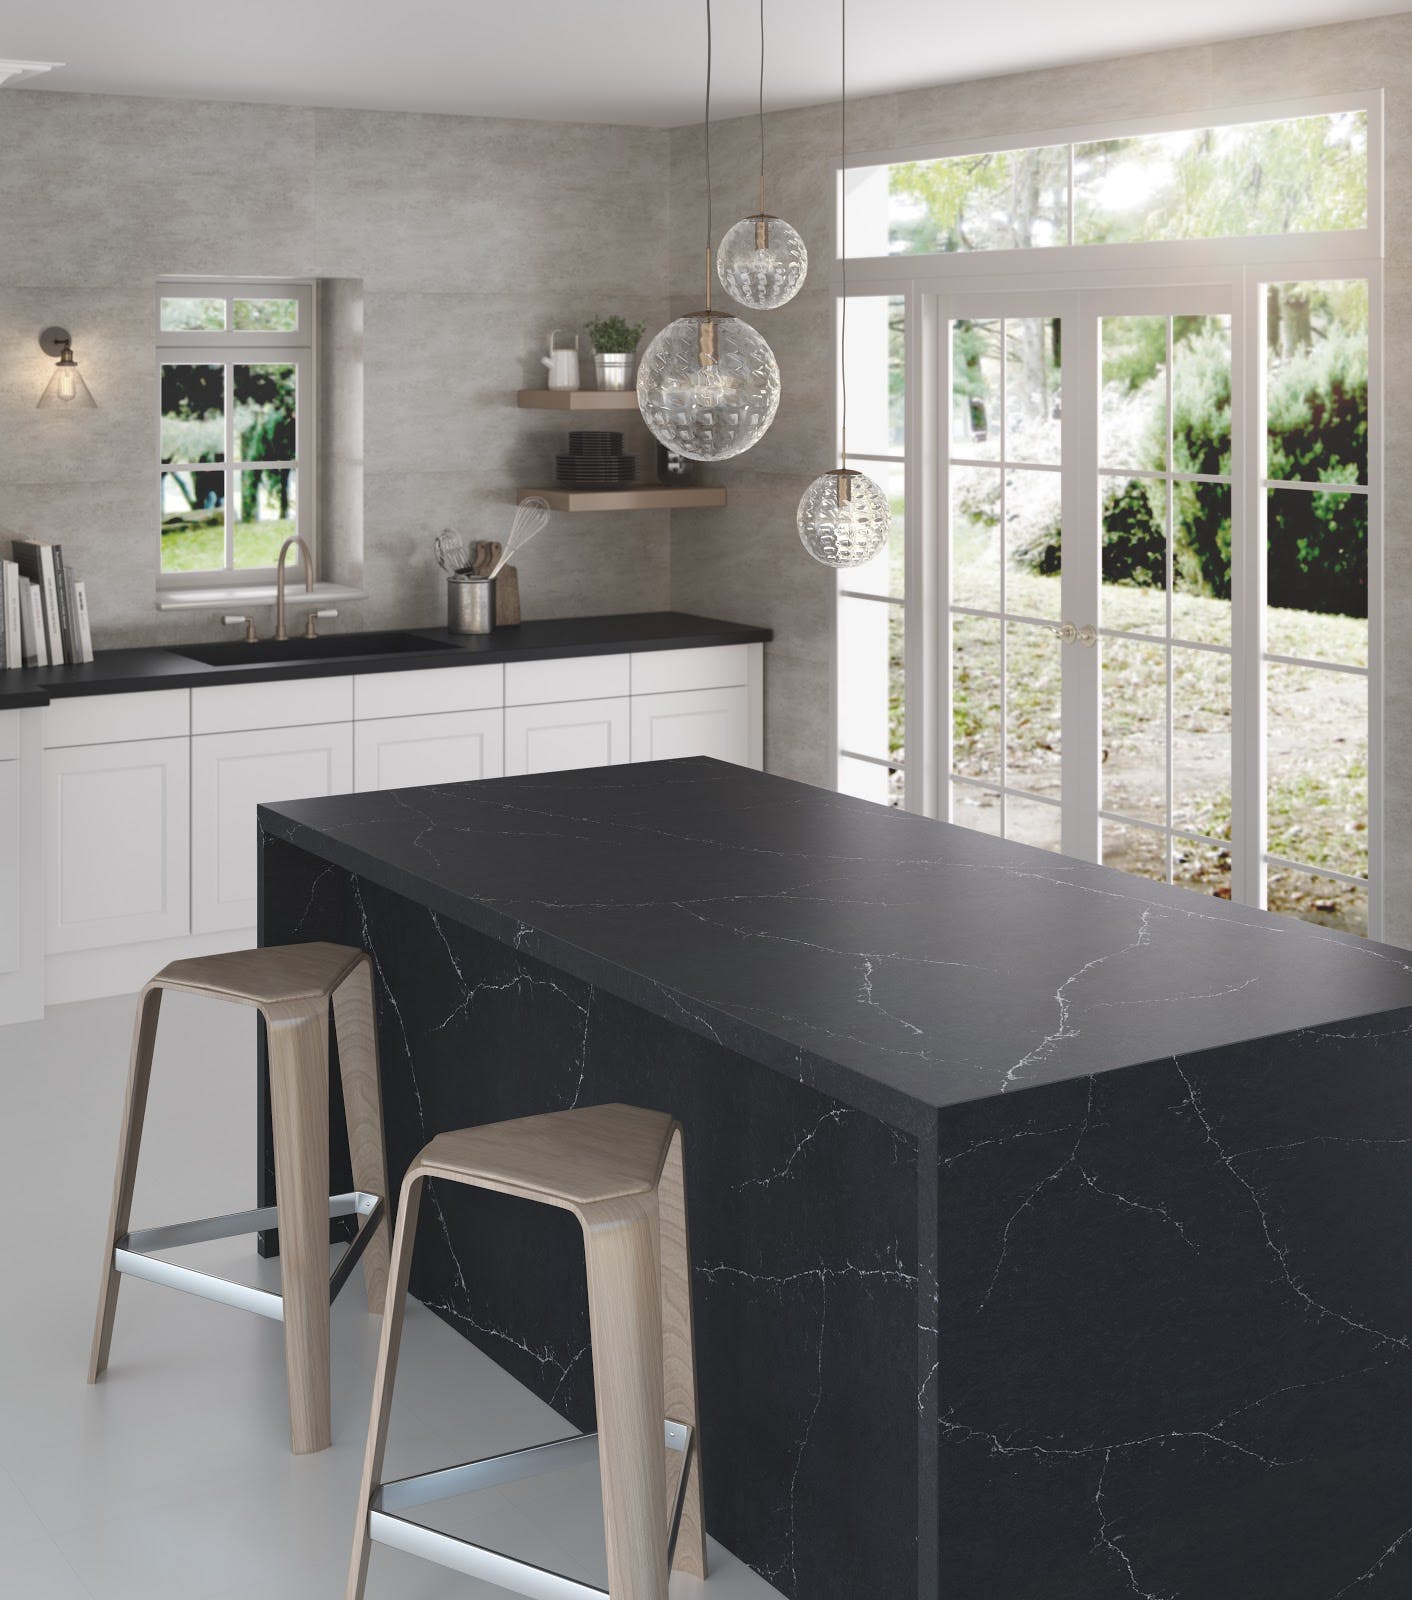 Image of RS11272 Silestone Kitchen Eternal Charcoal Soapstone 2 in Compact kitchens: Who says they're a disadvantage? - Cosentino